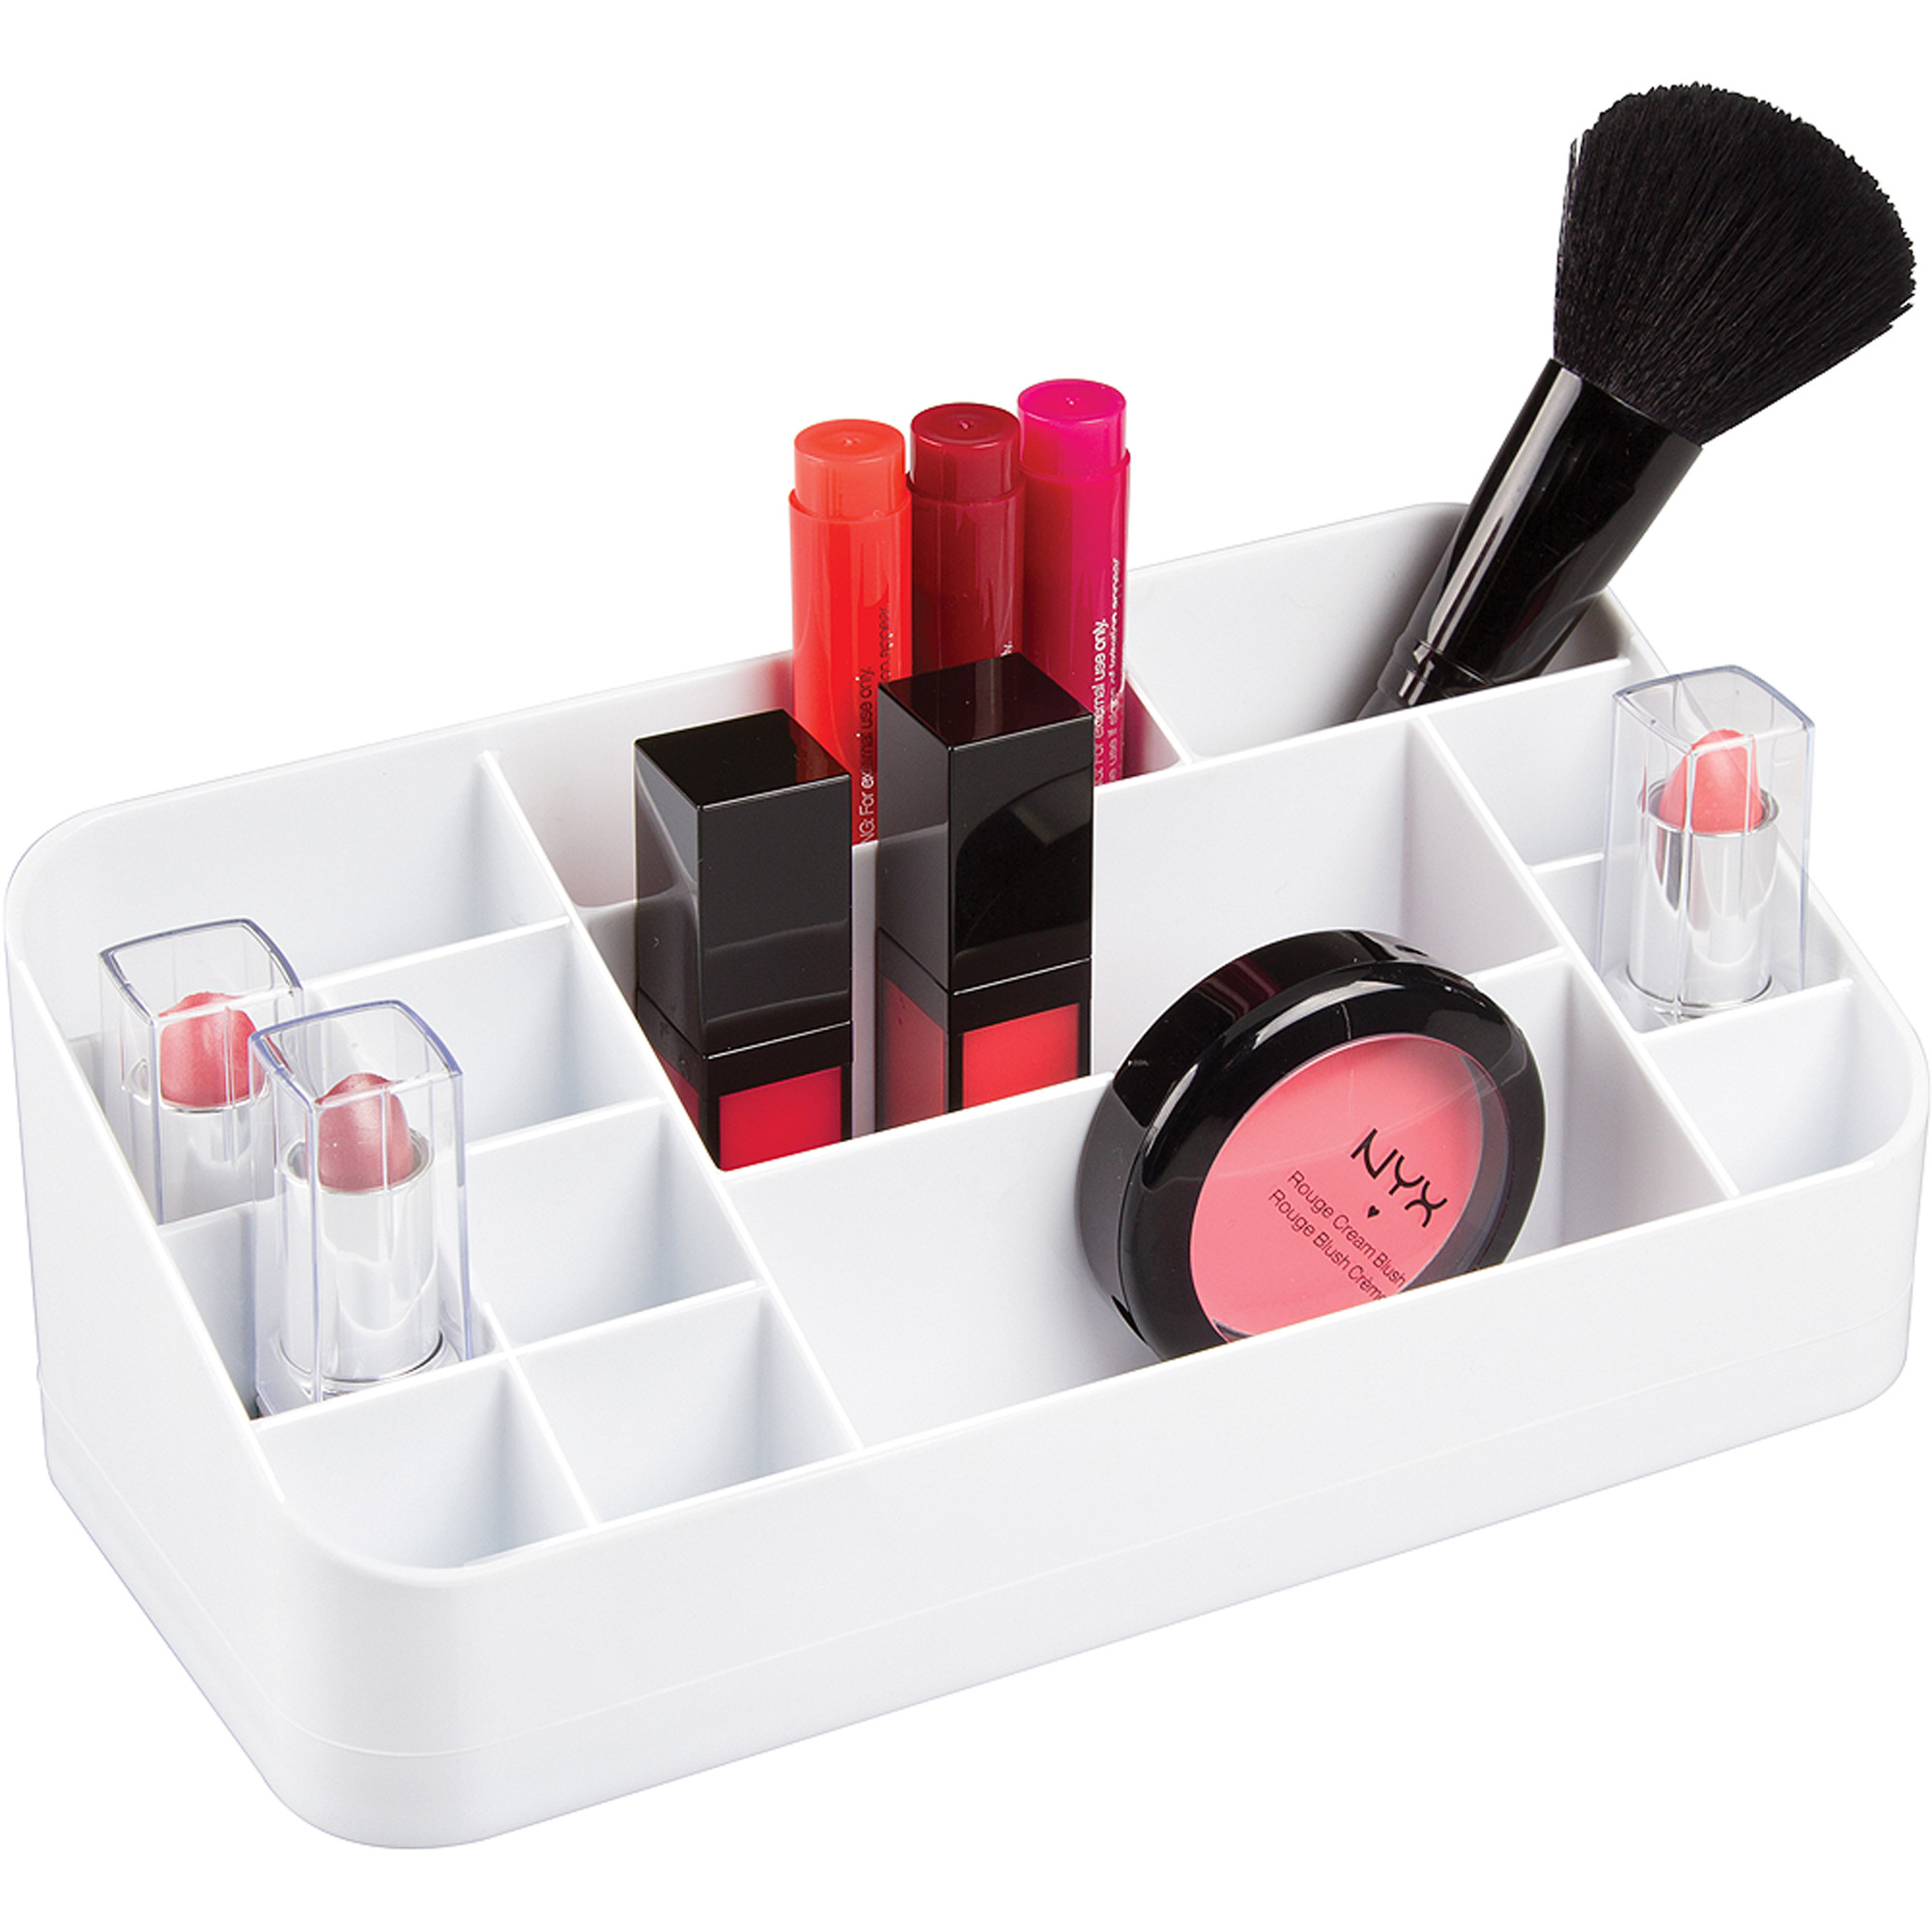 iDesign Clarity Cosmetic Organizer for Vanity Cabinet to Hold Makeup, Beauty Products, Lip Sticks, White - image 4 of 6